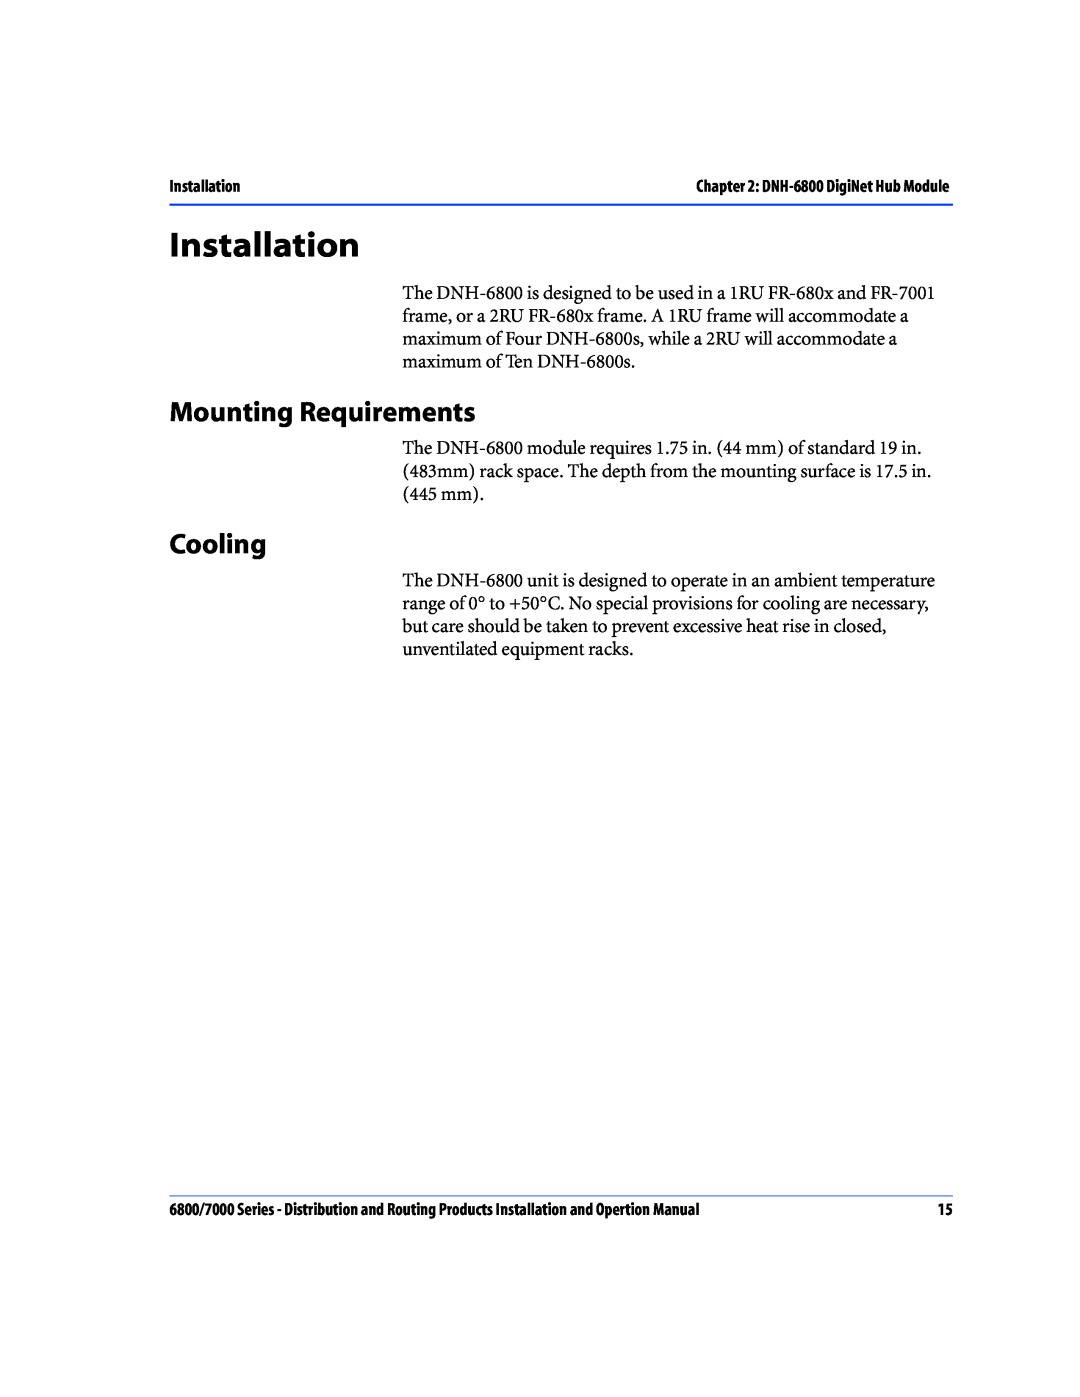 Nokia 6800 Series, 7000 Series operation manual Installation, Mounting Requirements, Cooling 